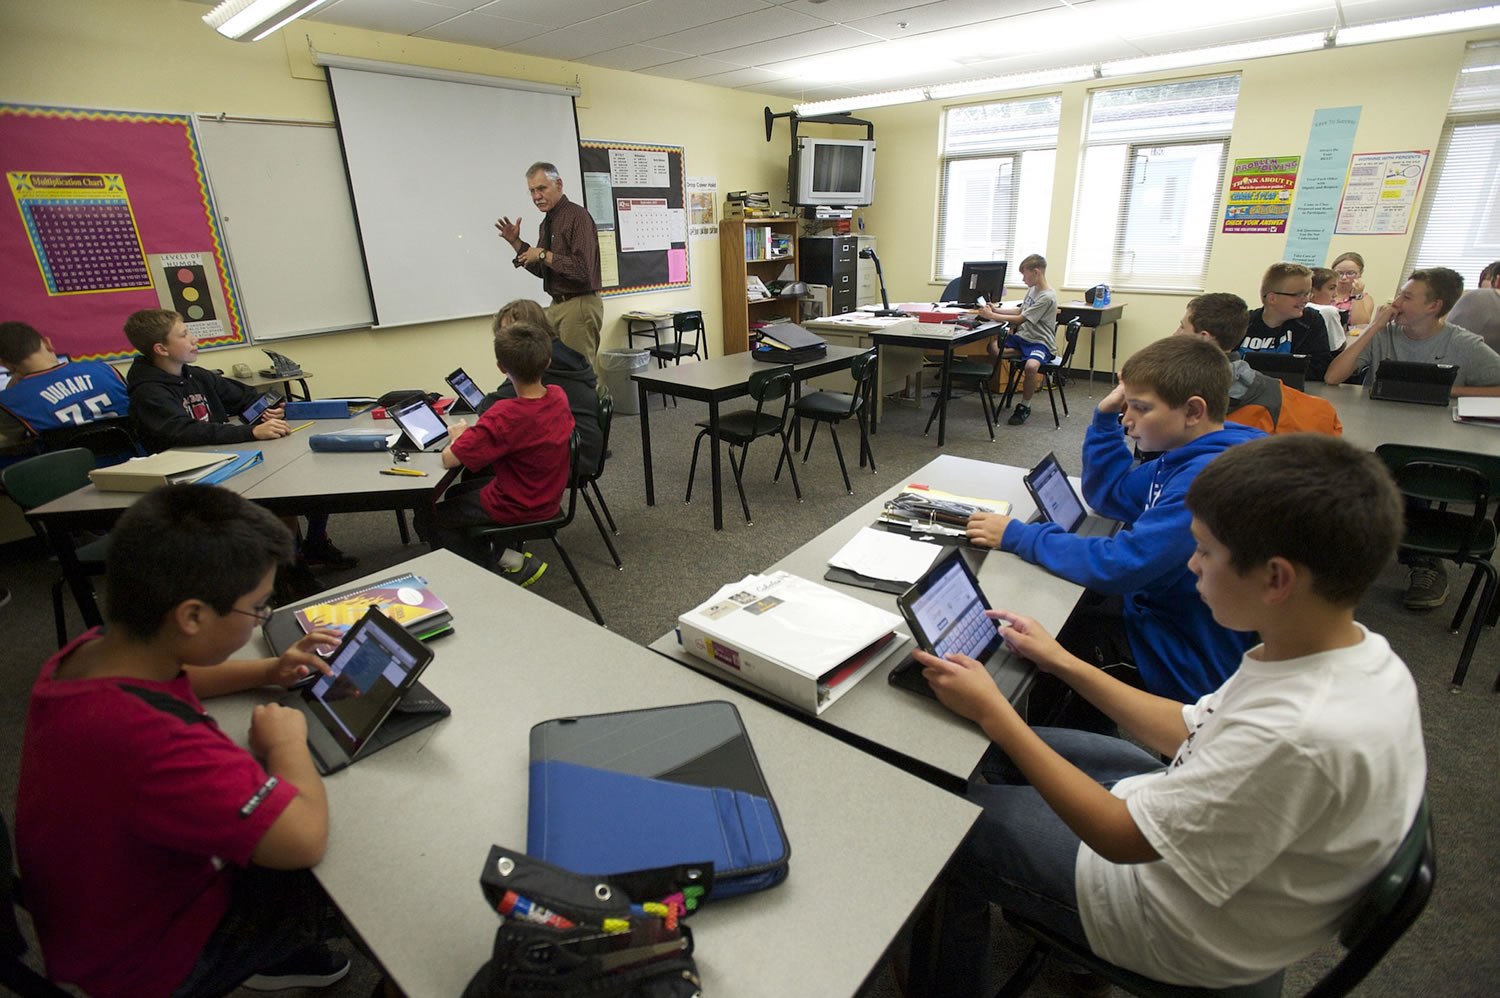 Students in Mike Hollins' math class at La Center Middle School use iPads for daily excercises in September of 2013.